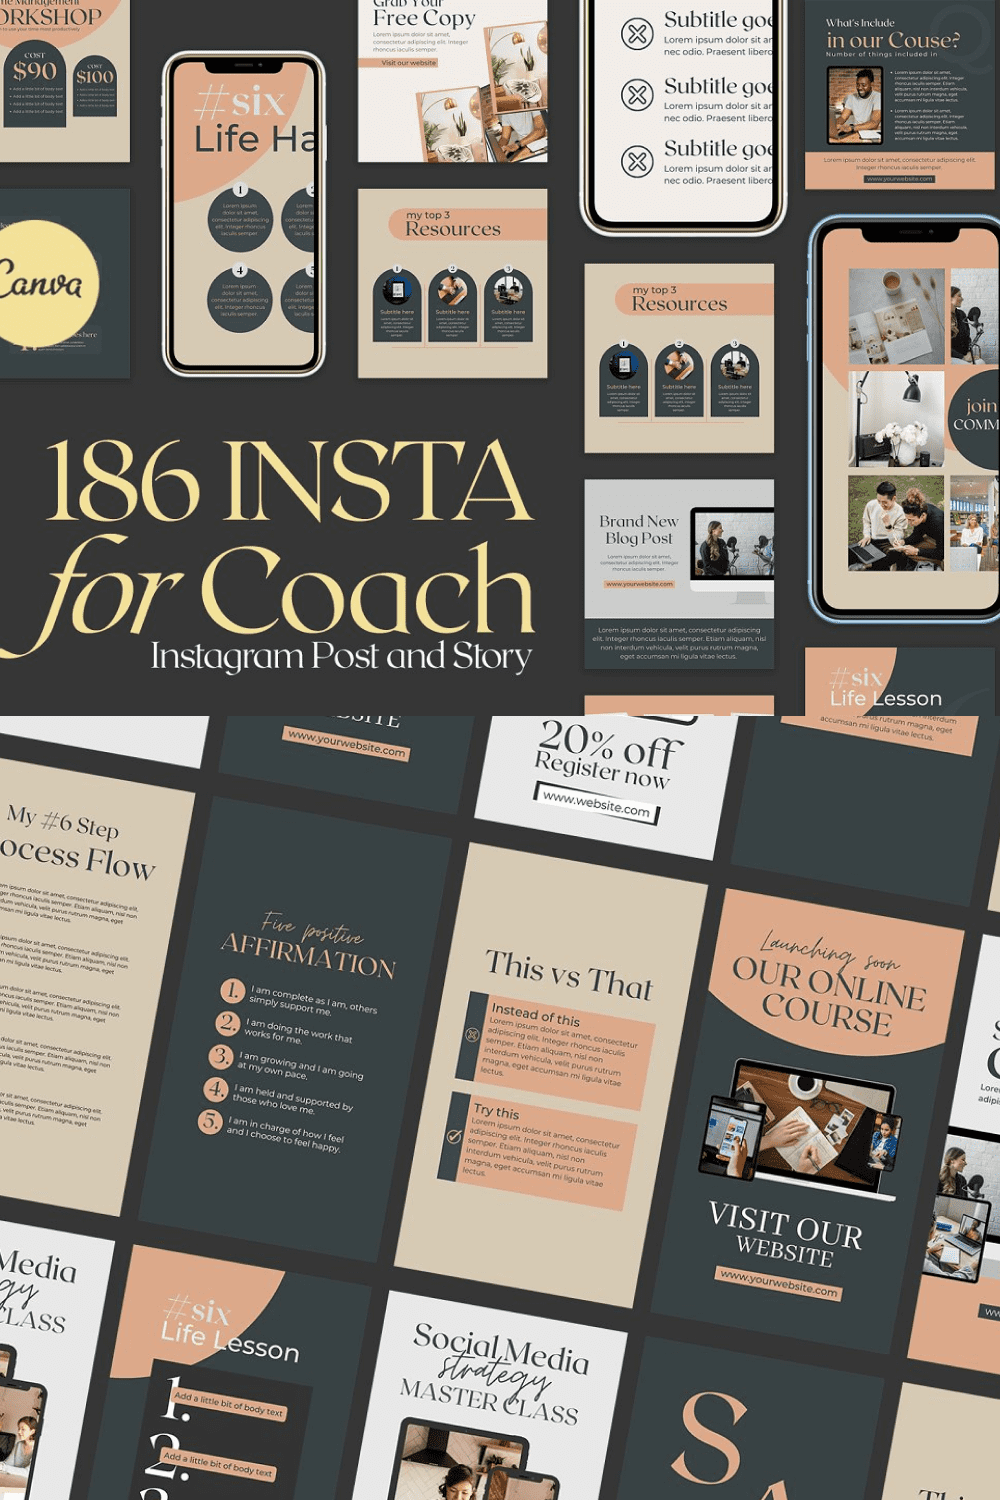 Instagram creator for coach canva - pinterest image preview.